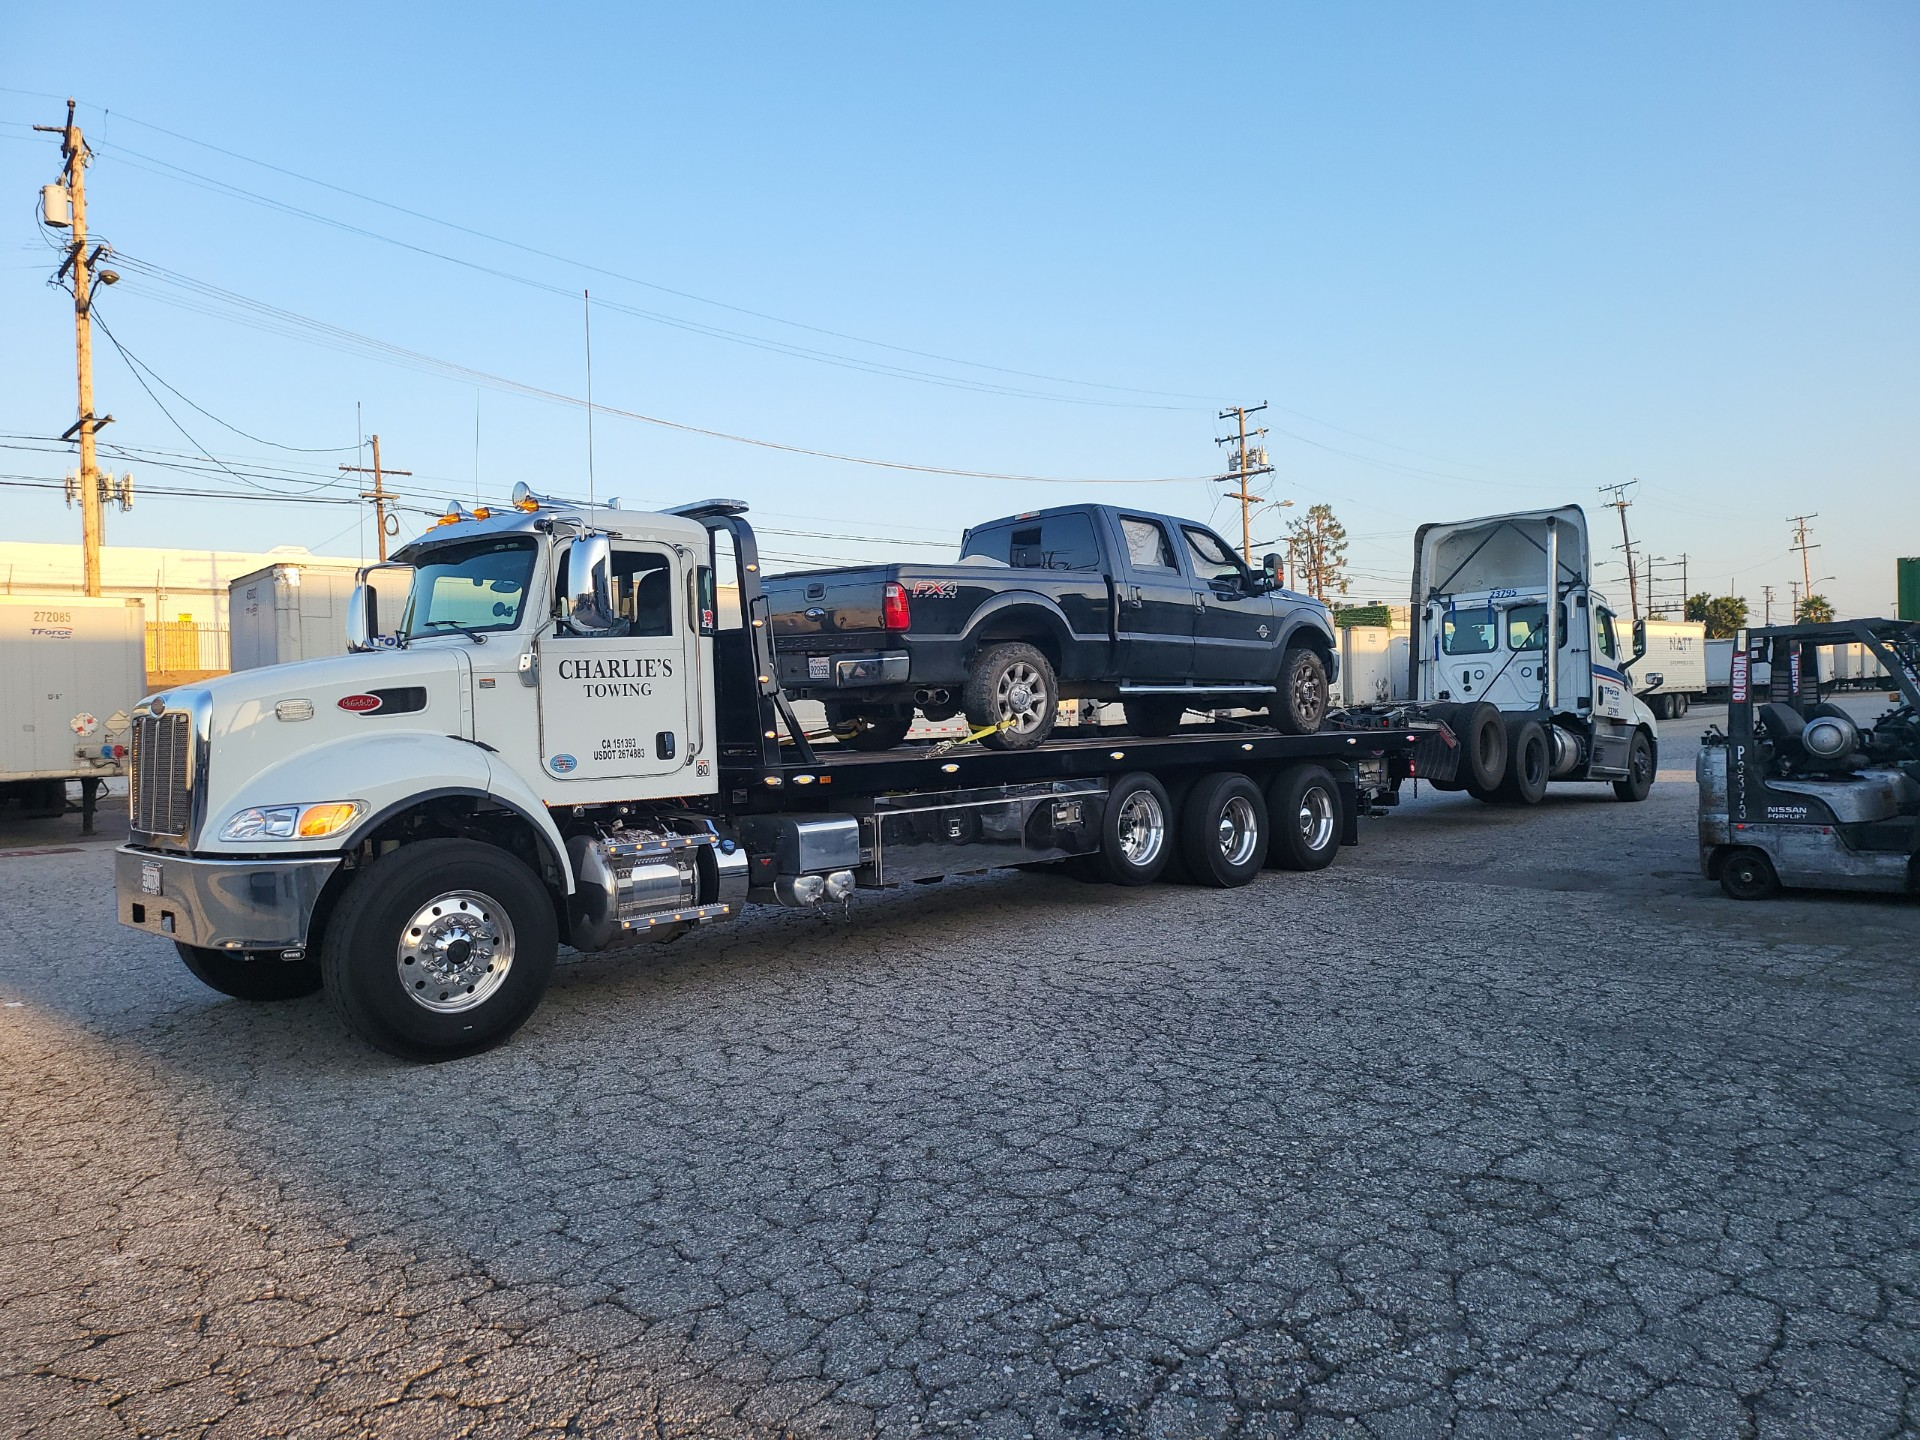 Charlie's 24hr Towing & Heavy Duty Los Angeles (323)261-1802